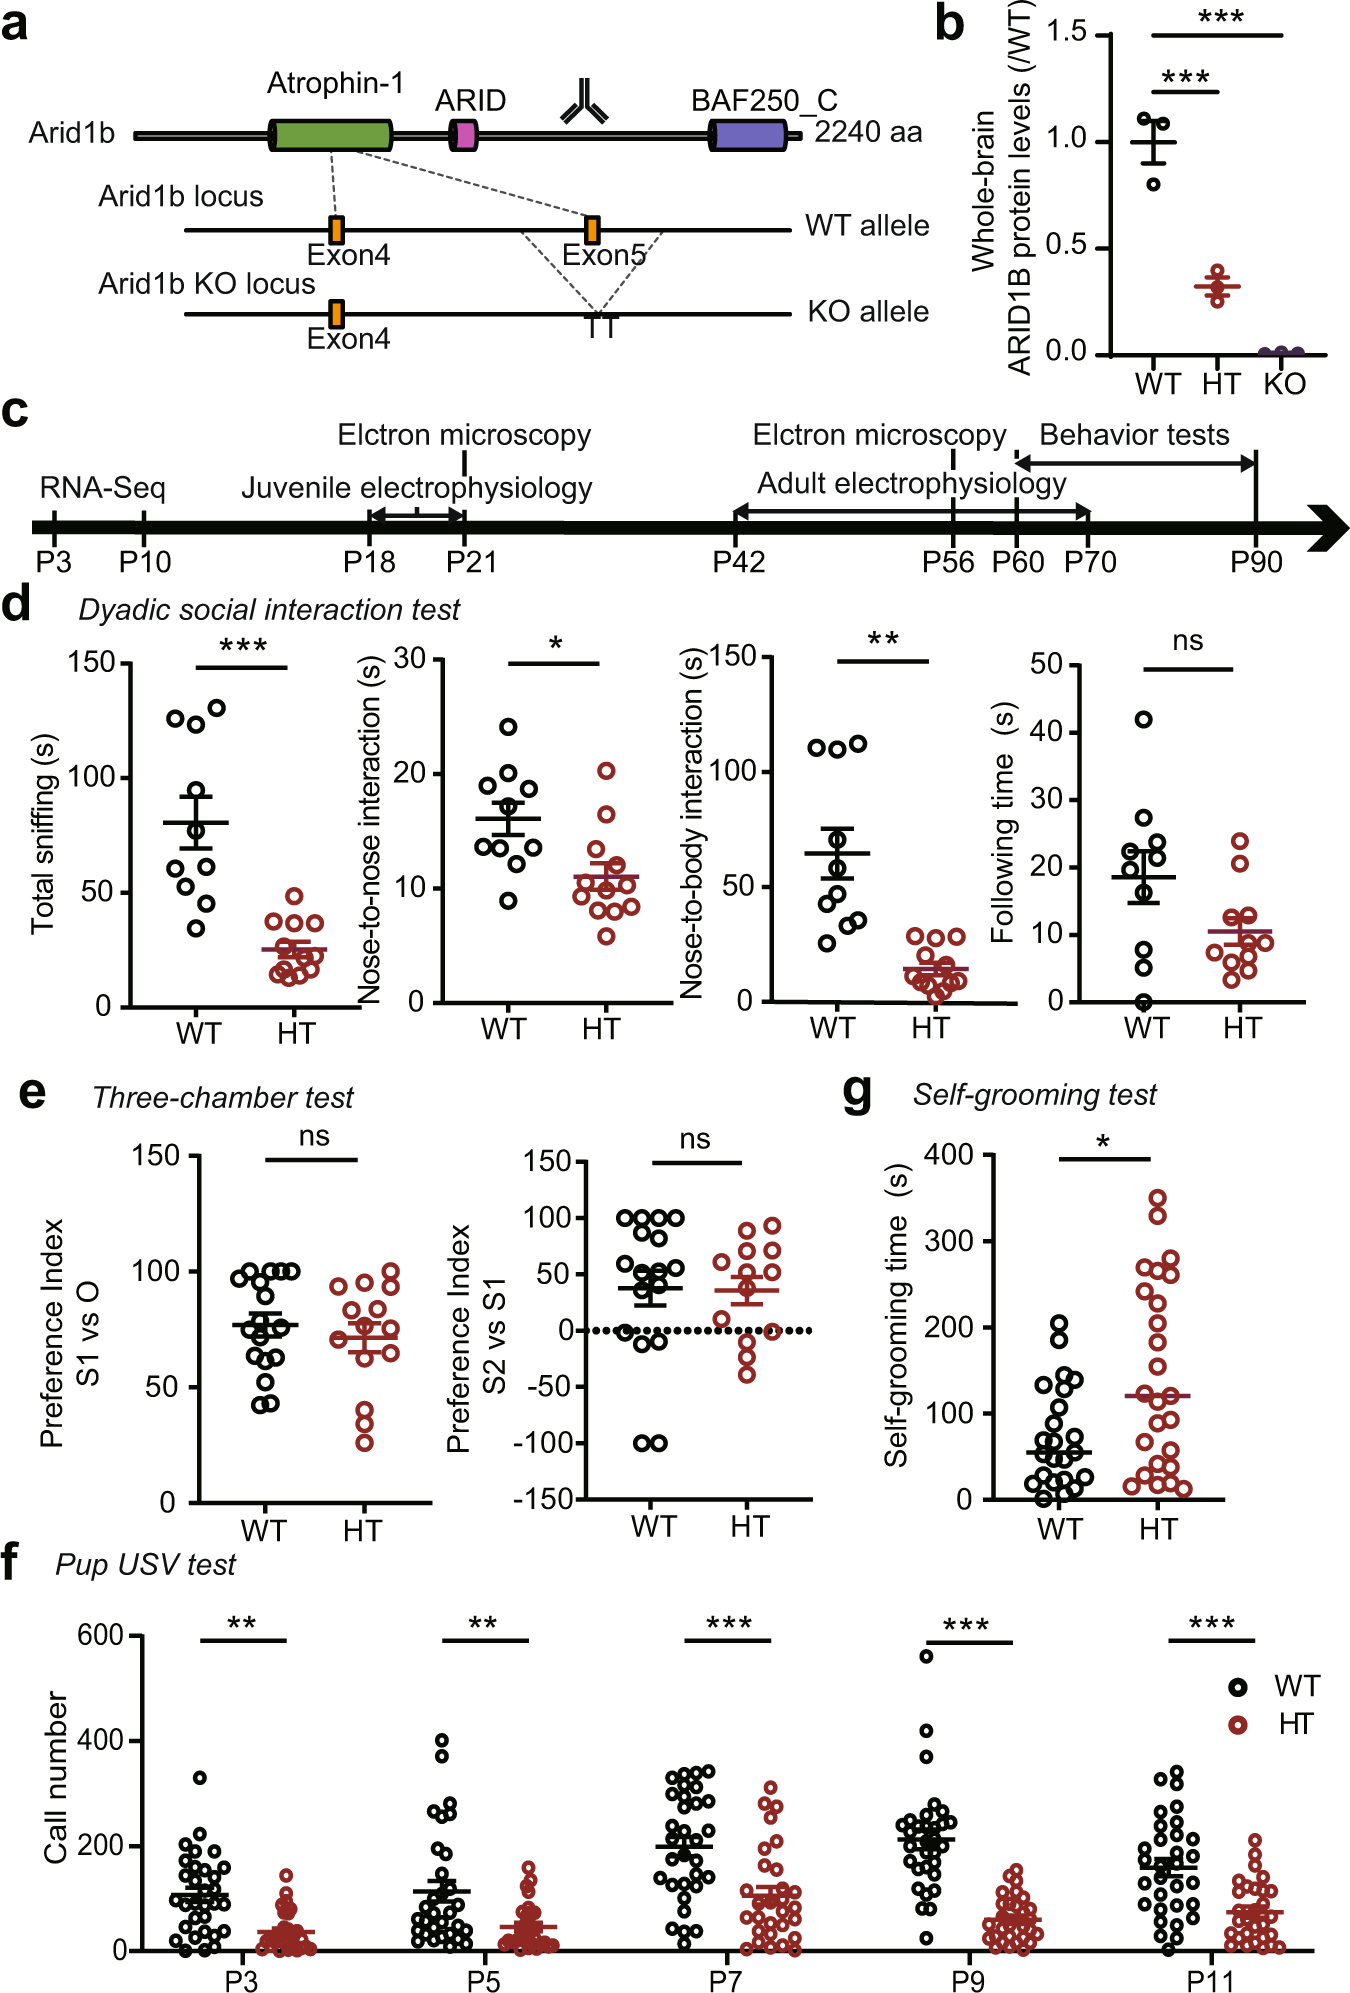 Early postnatal serotonin modulation prevents adult-stage deficits in  Arid1b-deficient mice through synaptic transcriptional reprogramming |  Nature Communications